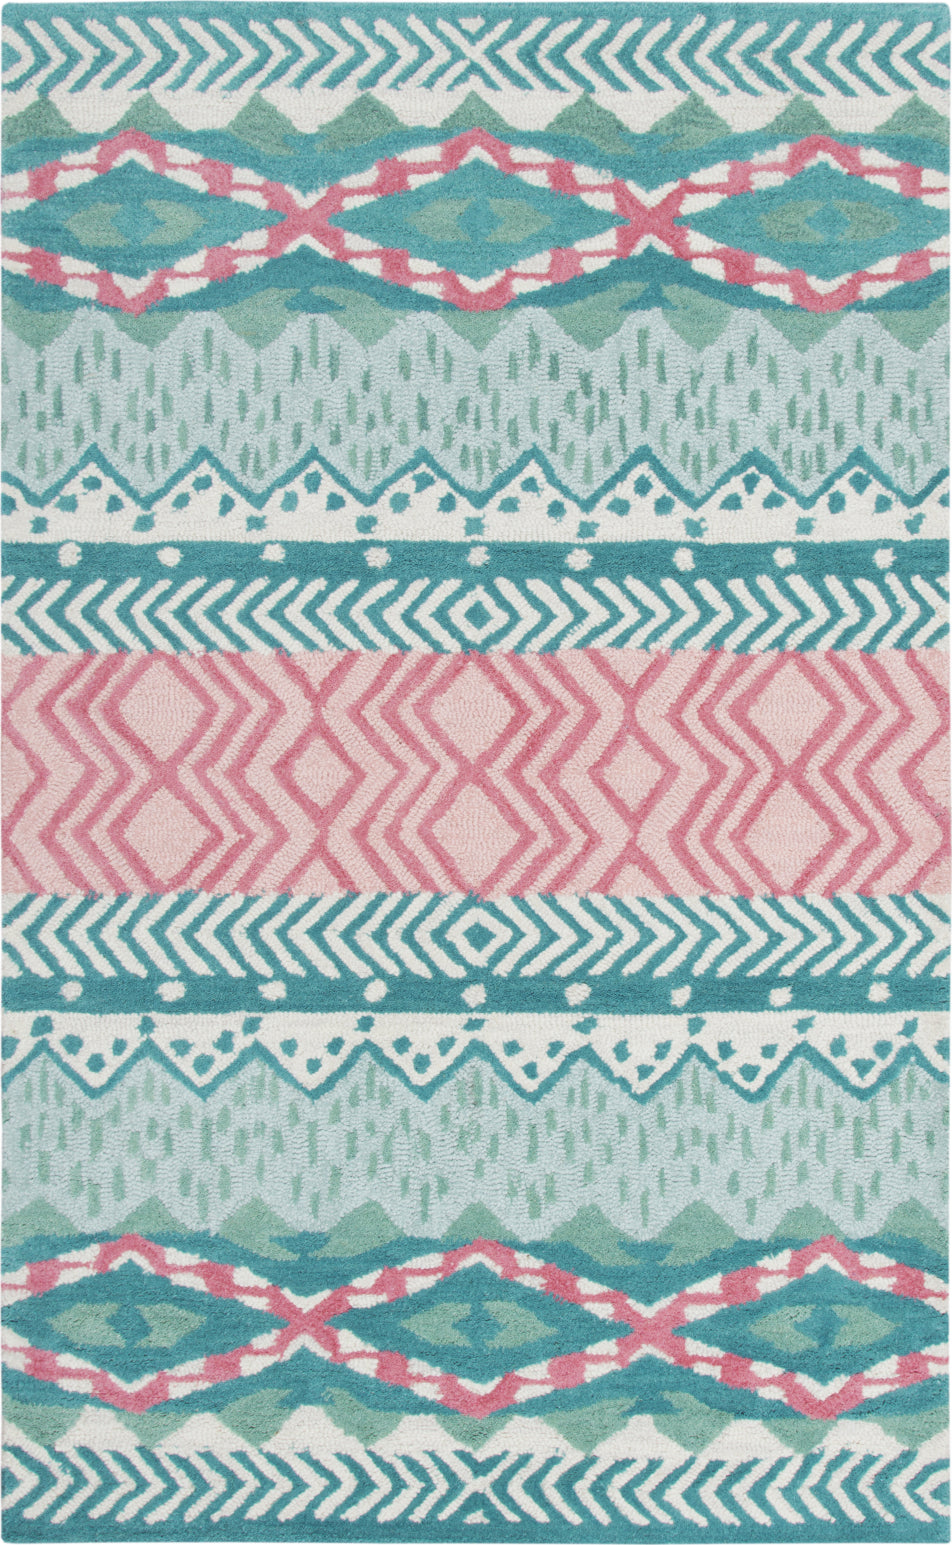 Rizzy Play Day PD343B Teal Area Rug main image